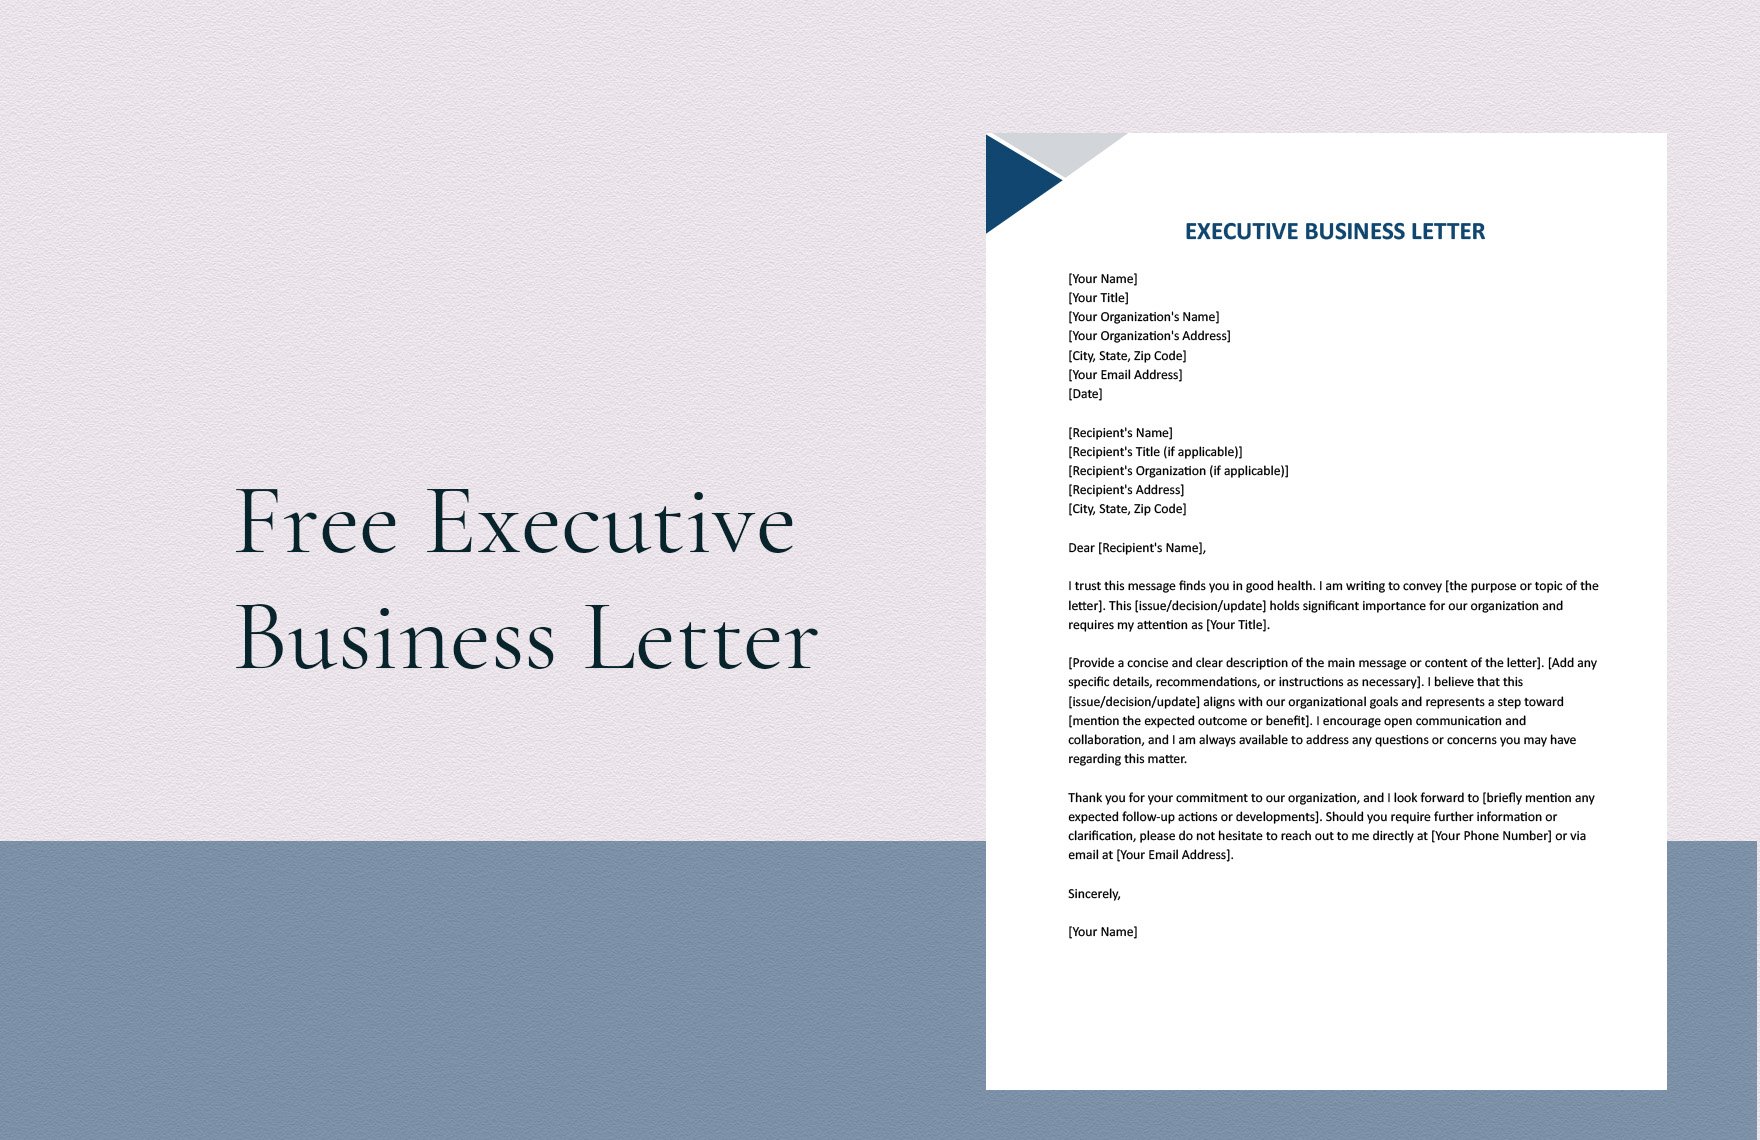 Executive Business Letter